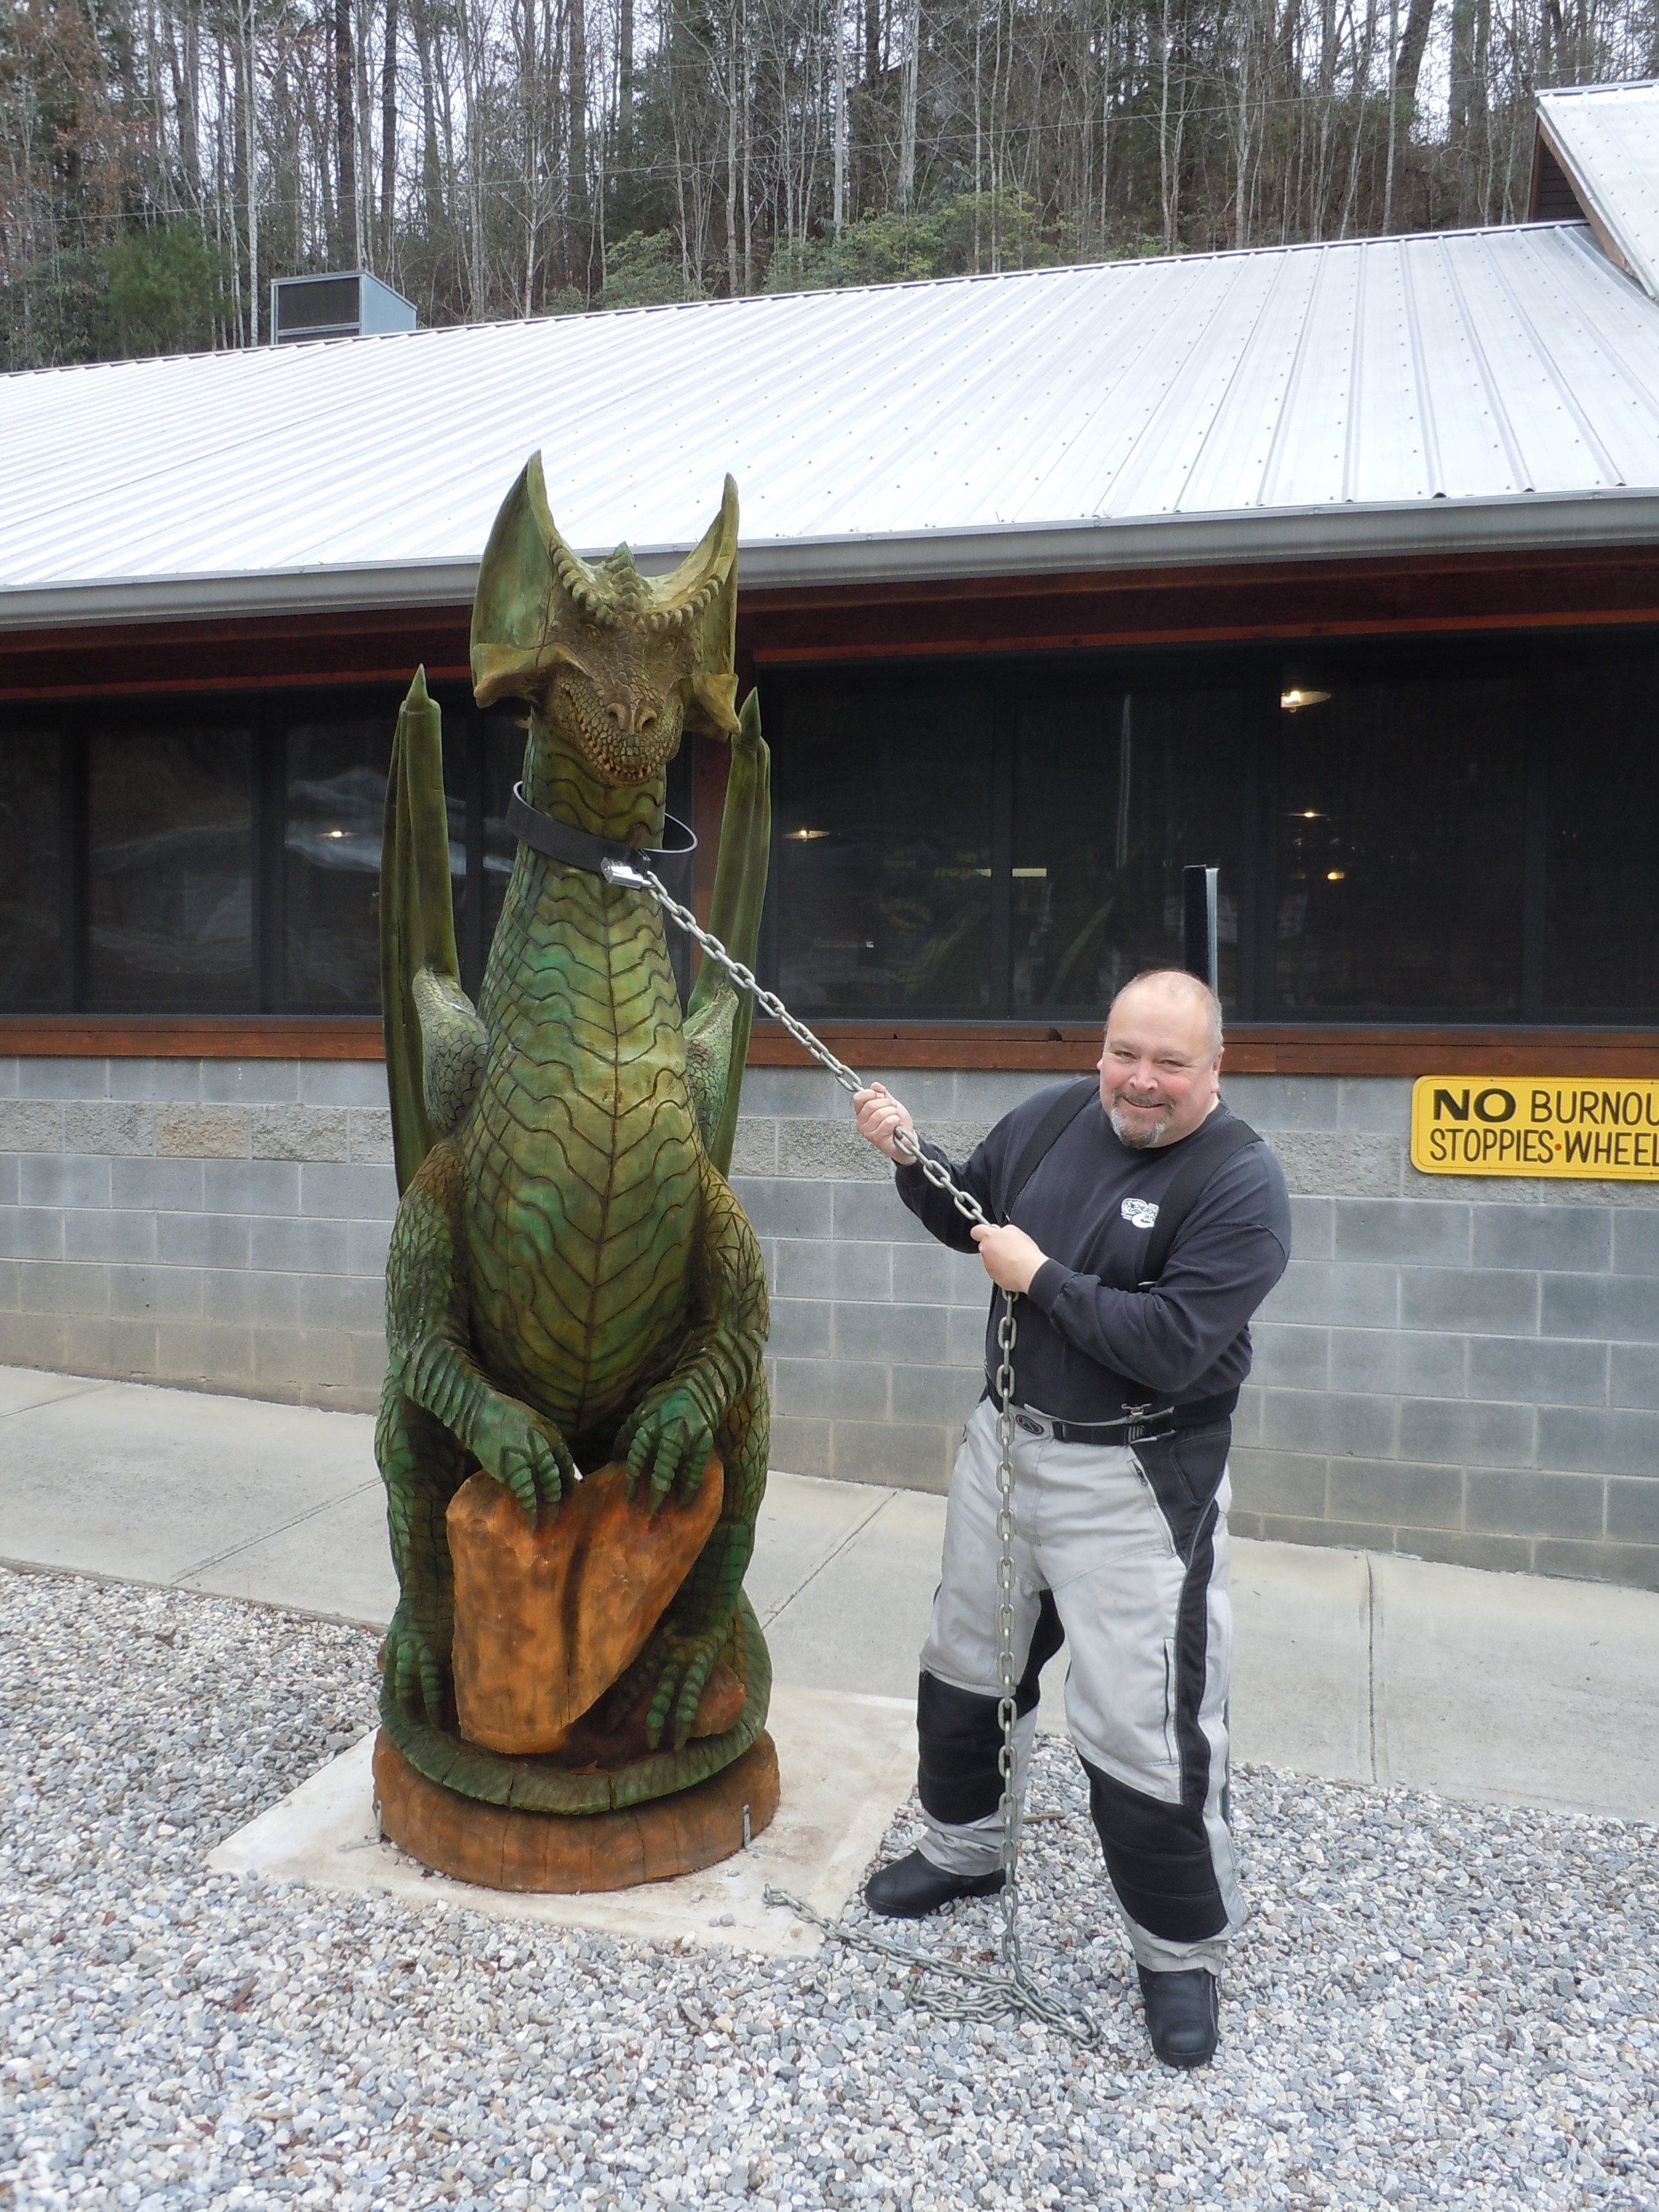 Lanny with a dragon on a leash